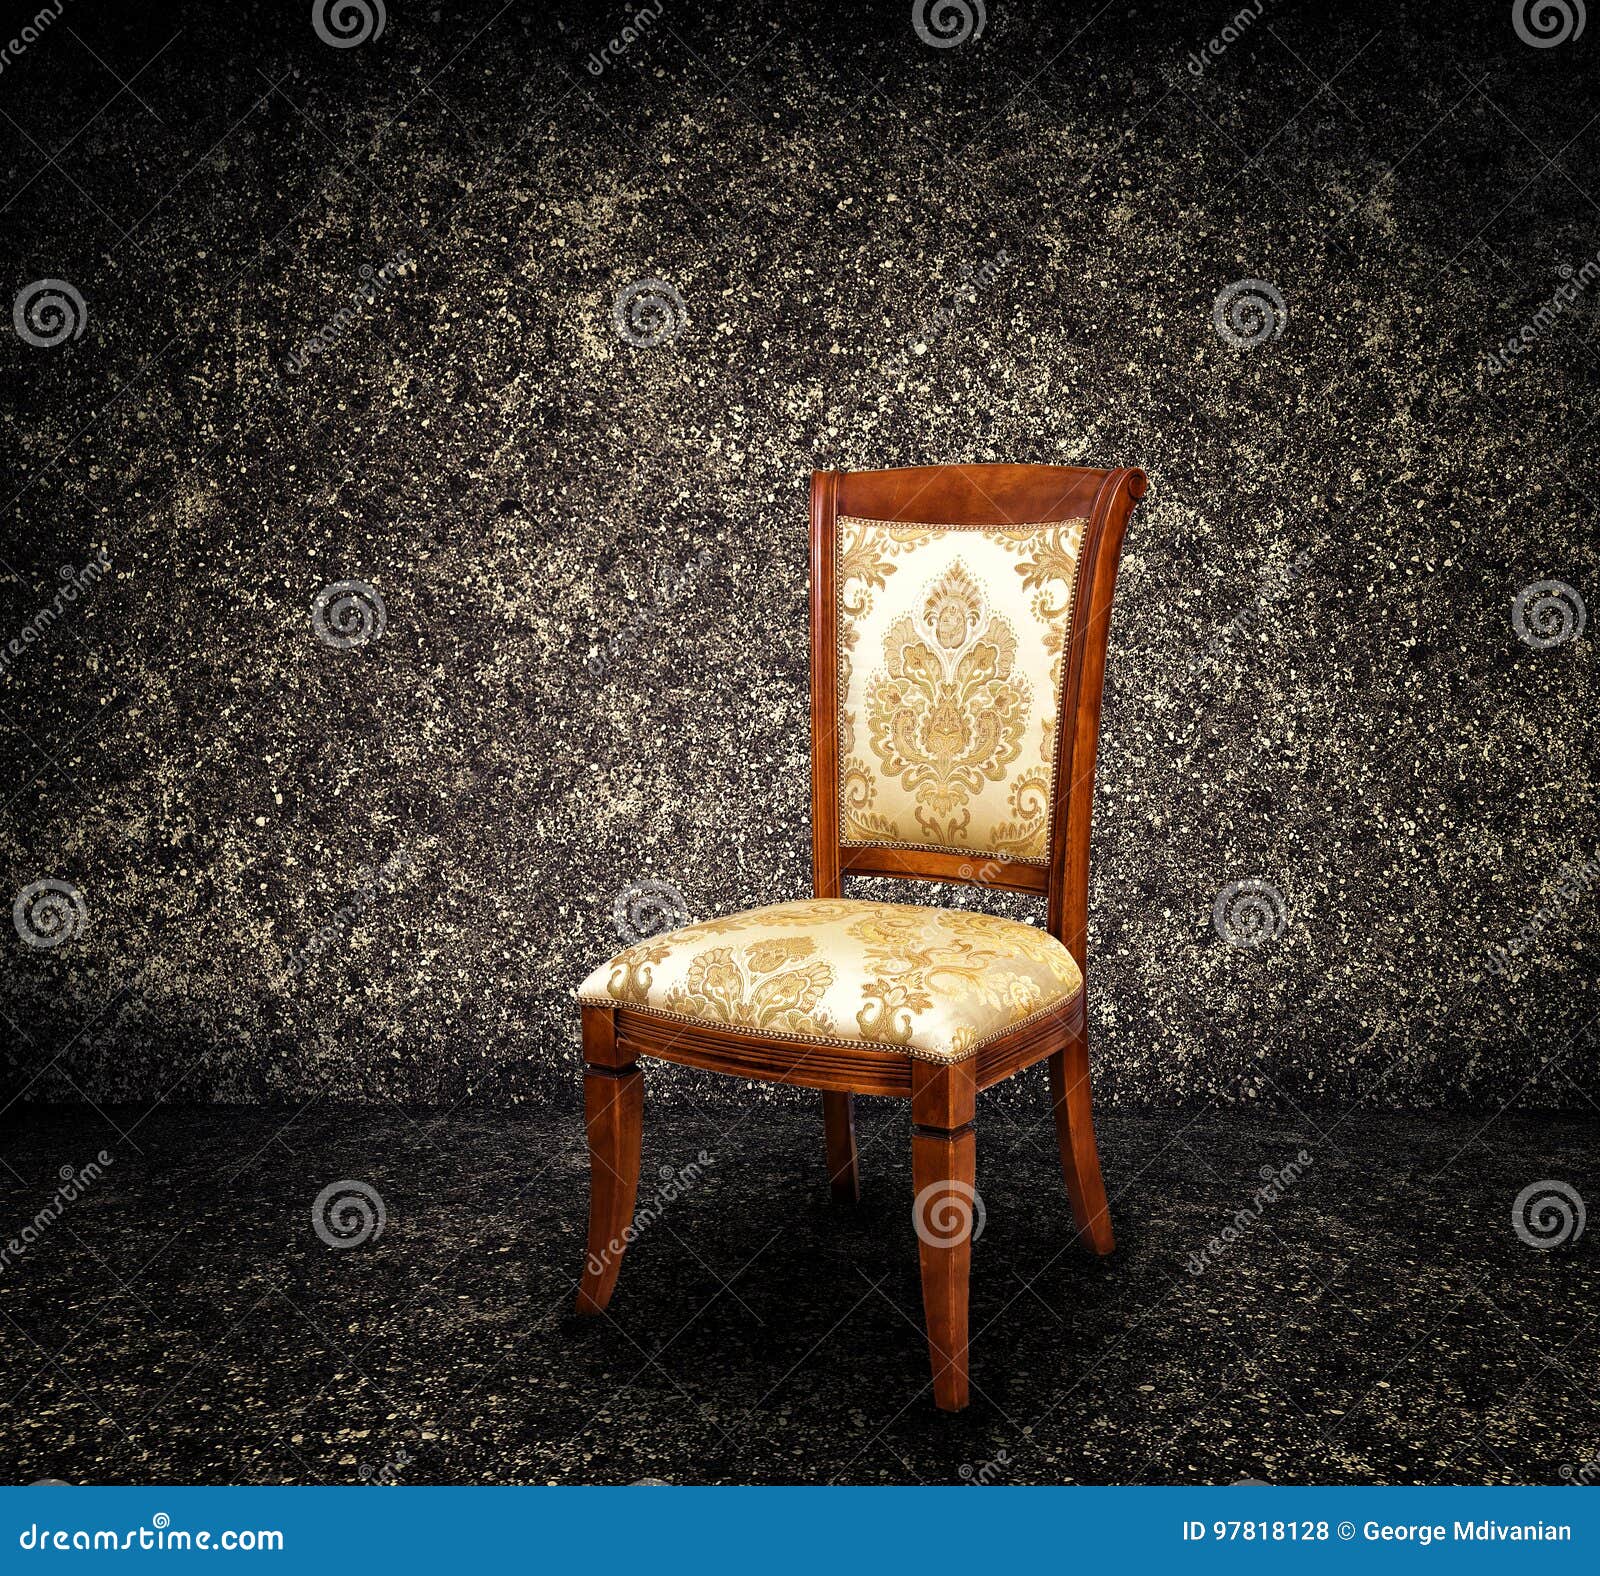 Vintage Chair on Background Stock Photo - Image of indoor, background:  97818128